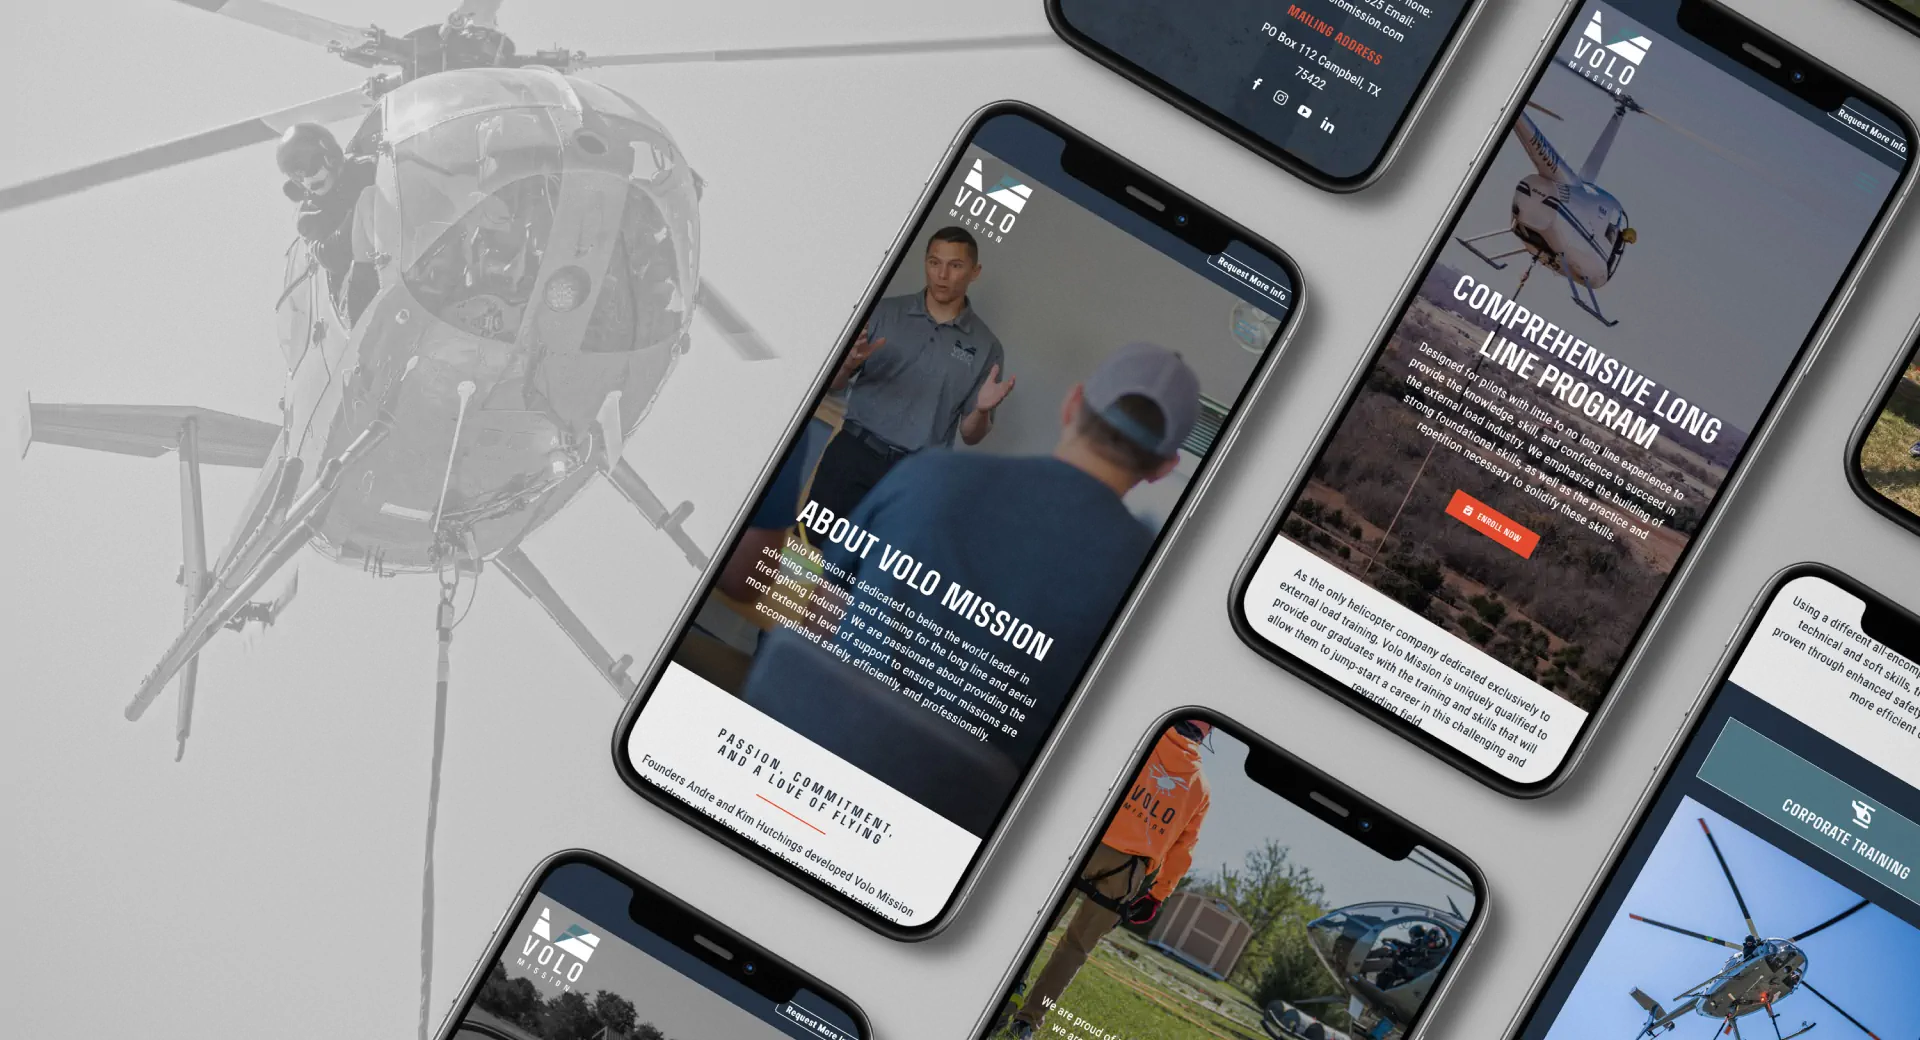 website design for aviation companies - website design for helicopter training company